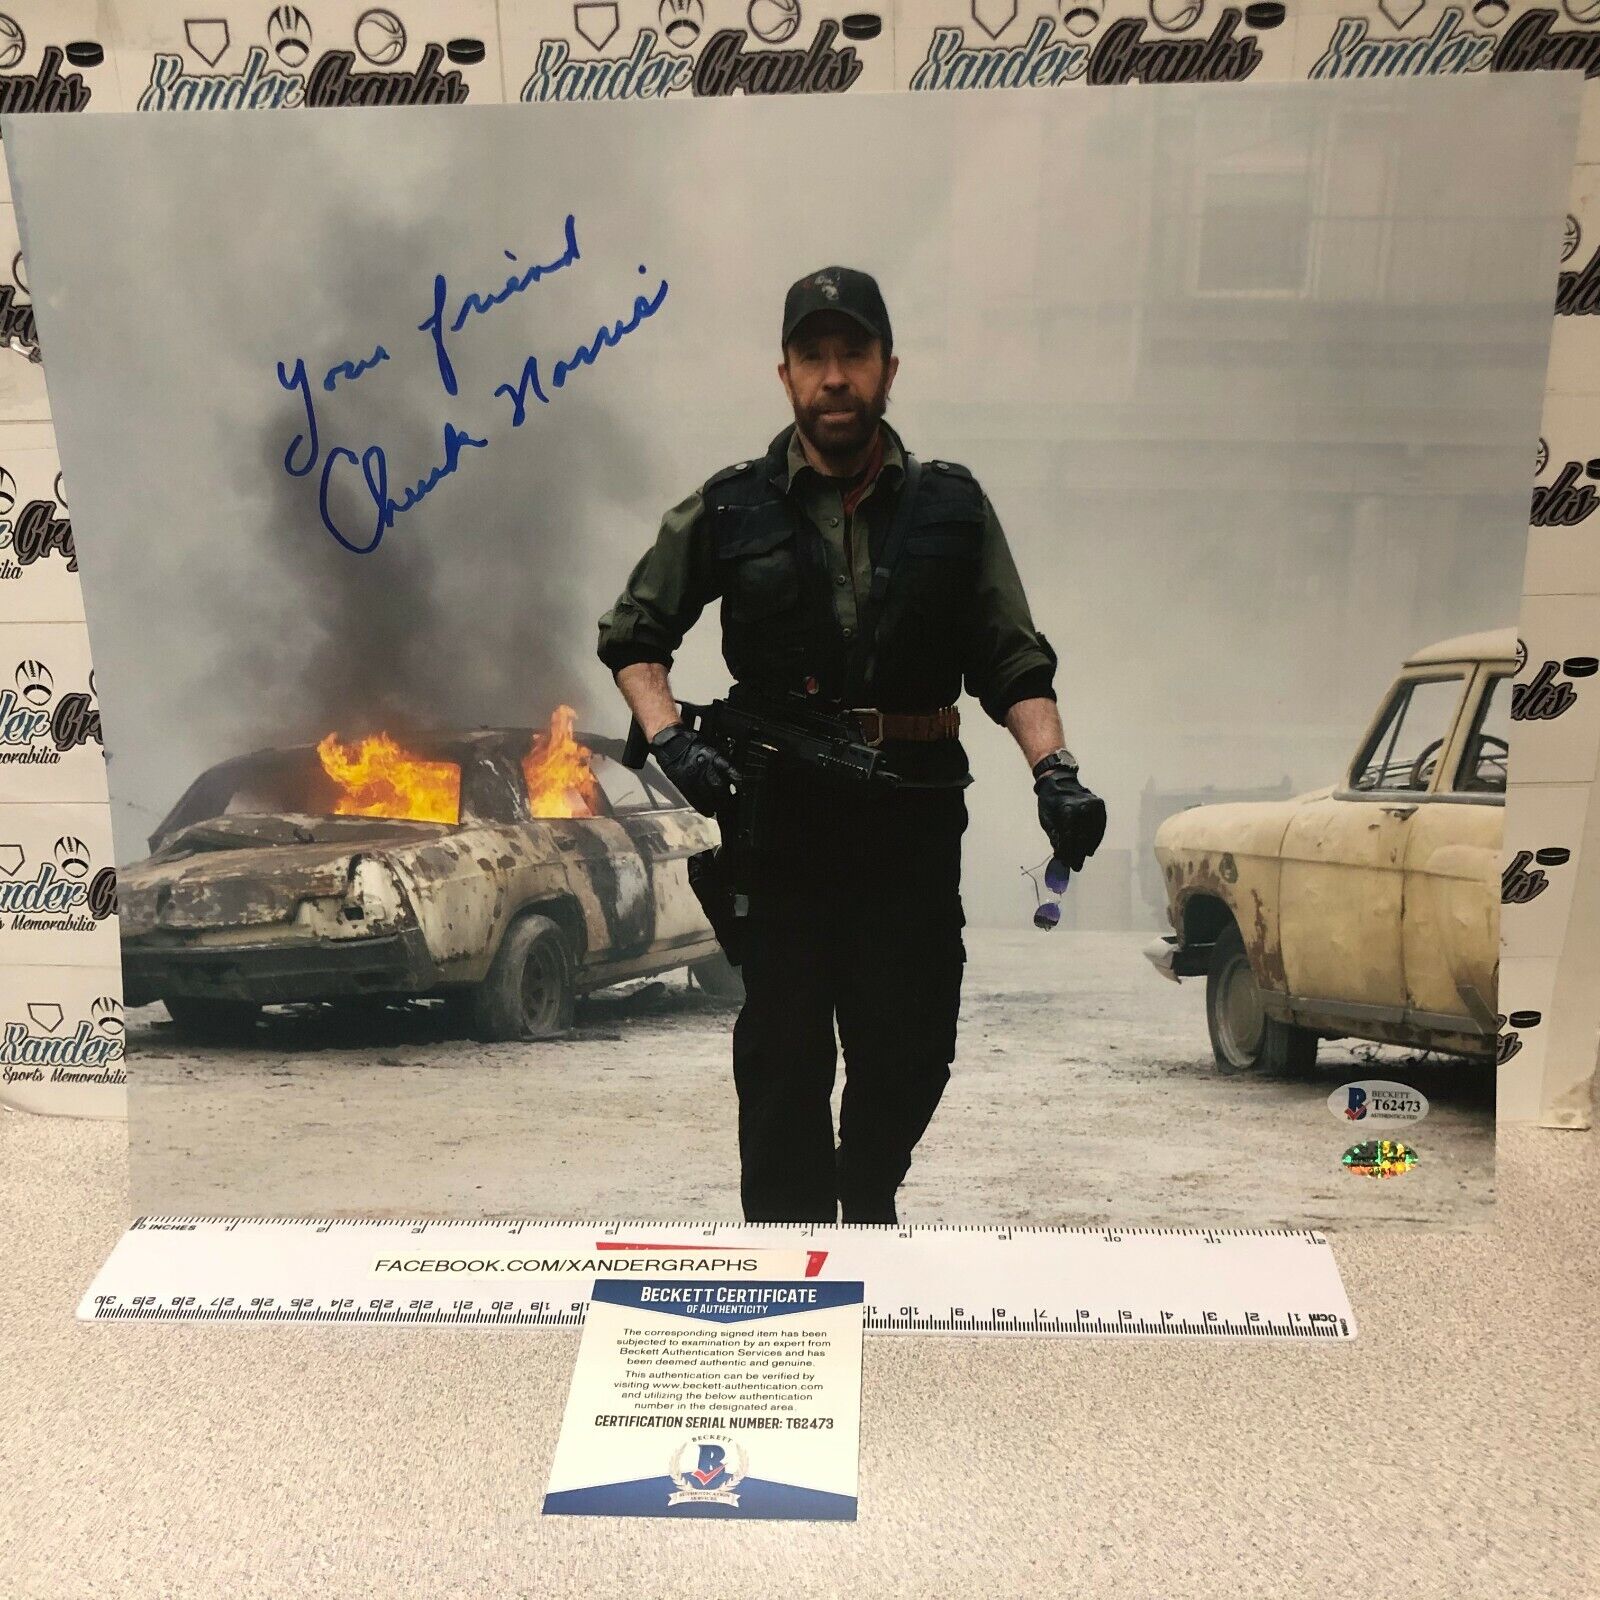 CHUCK NORRIS SIGNED AUTOGRAPHED 11X14 Photo Poster paintingGRAPH DELTA FORCE BECKETT BAS COA